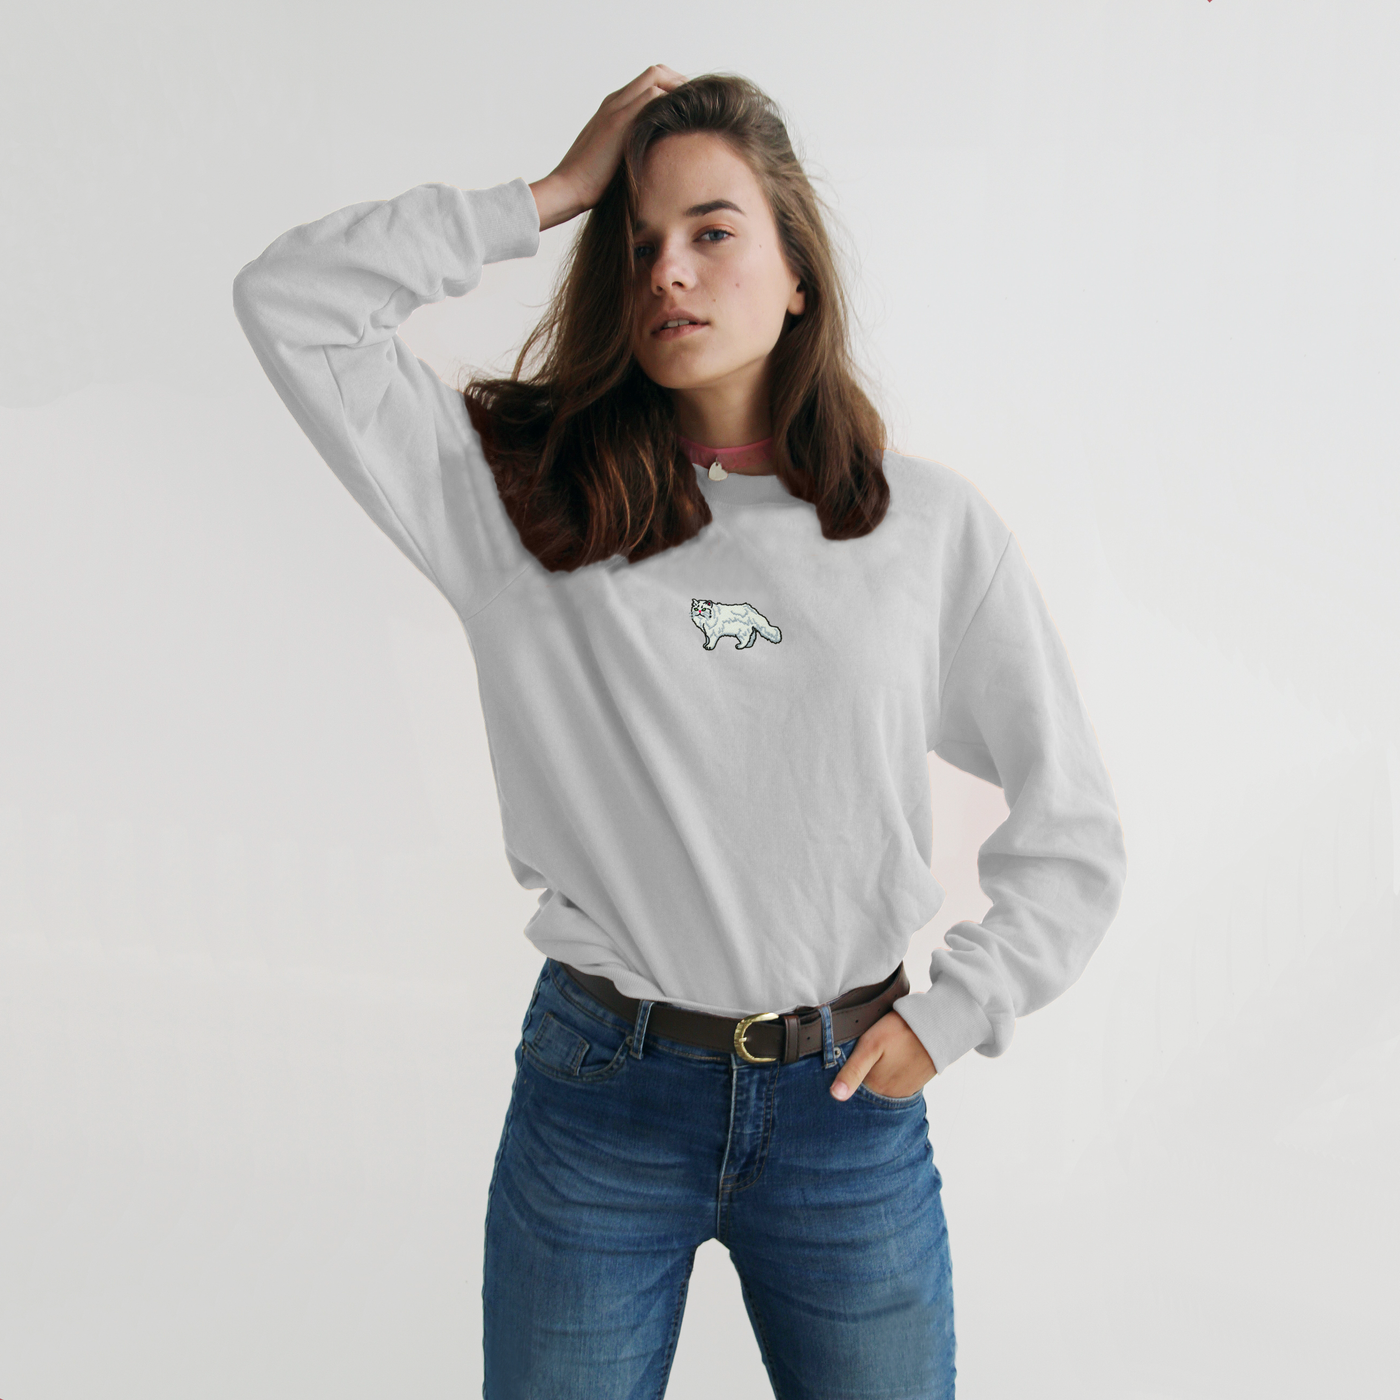 Bobby's Planet Women's Embroidered Persian Long Sleeve Shirt from Paws Dog Cat Animals Collection in White Color#color_white